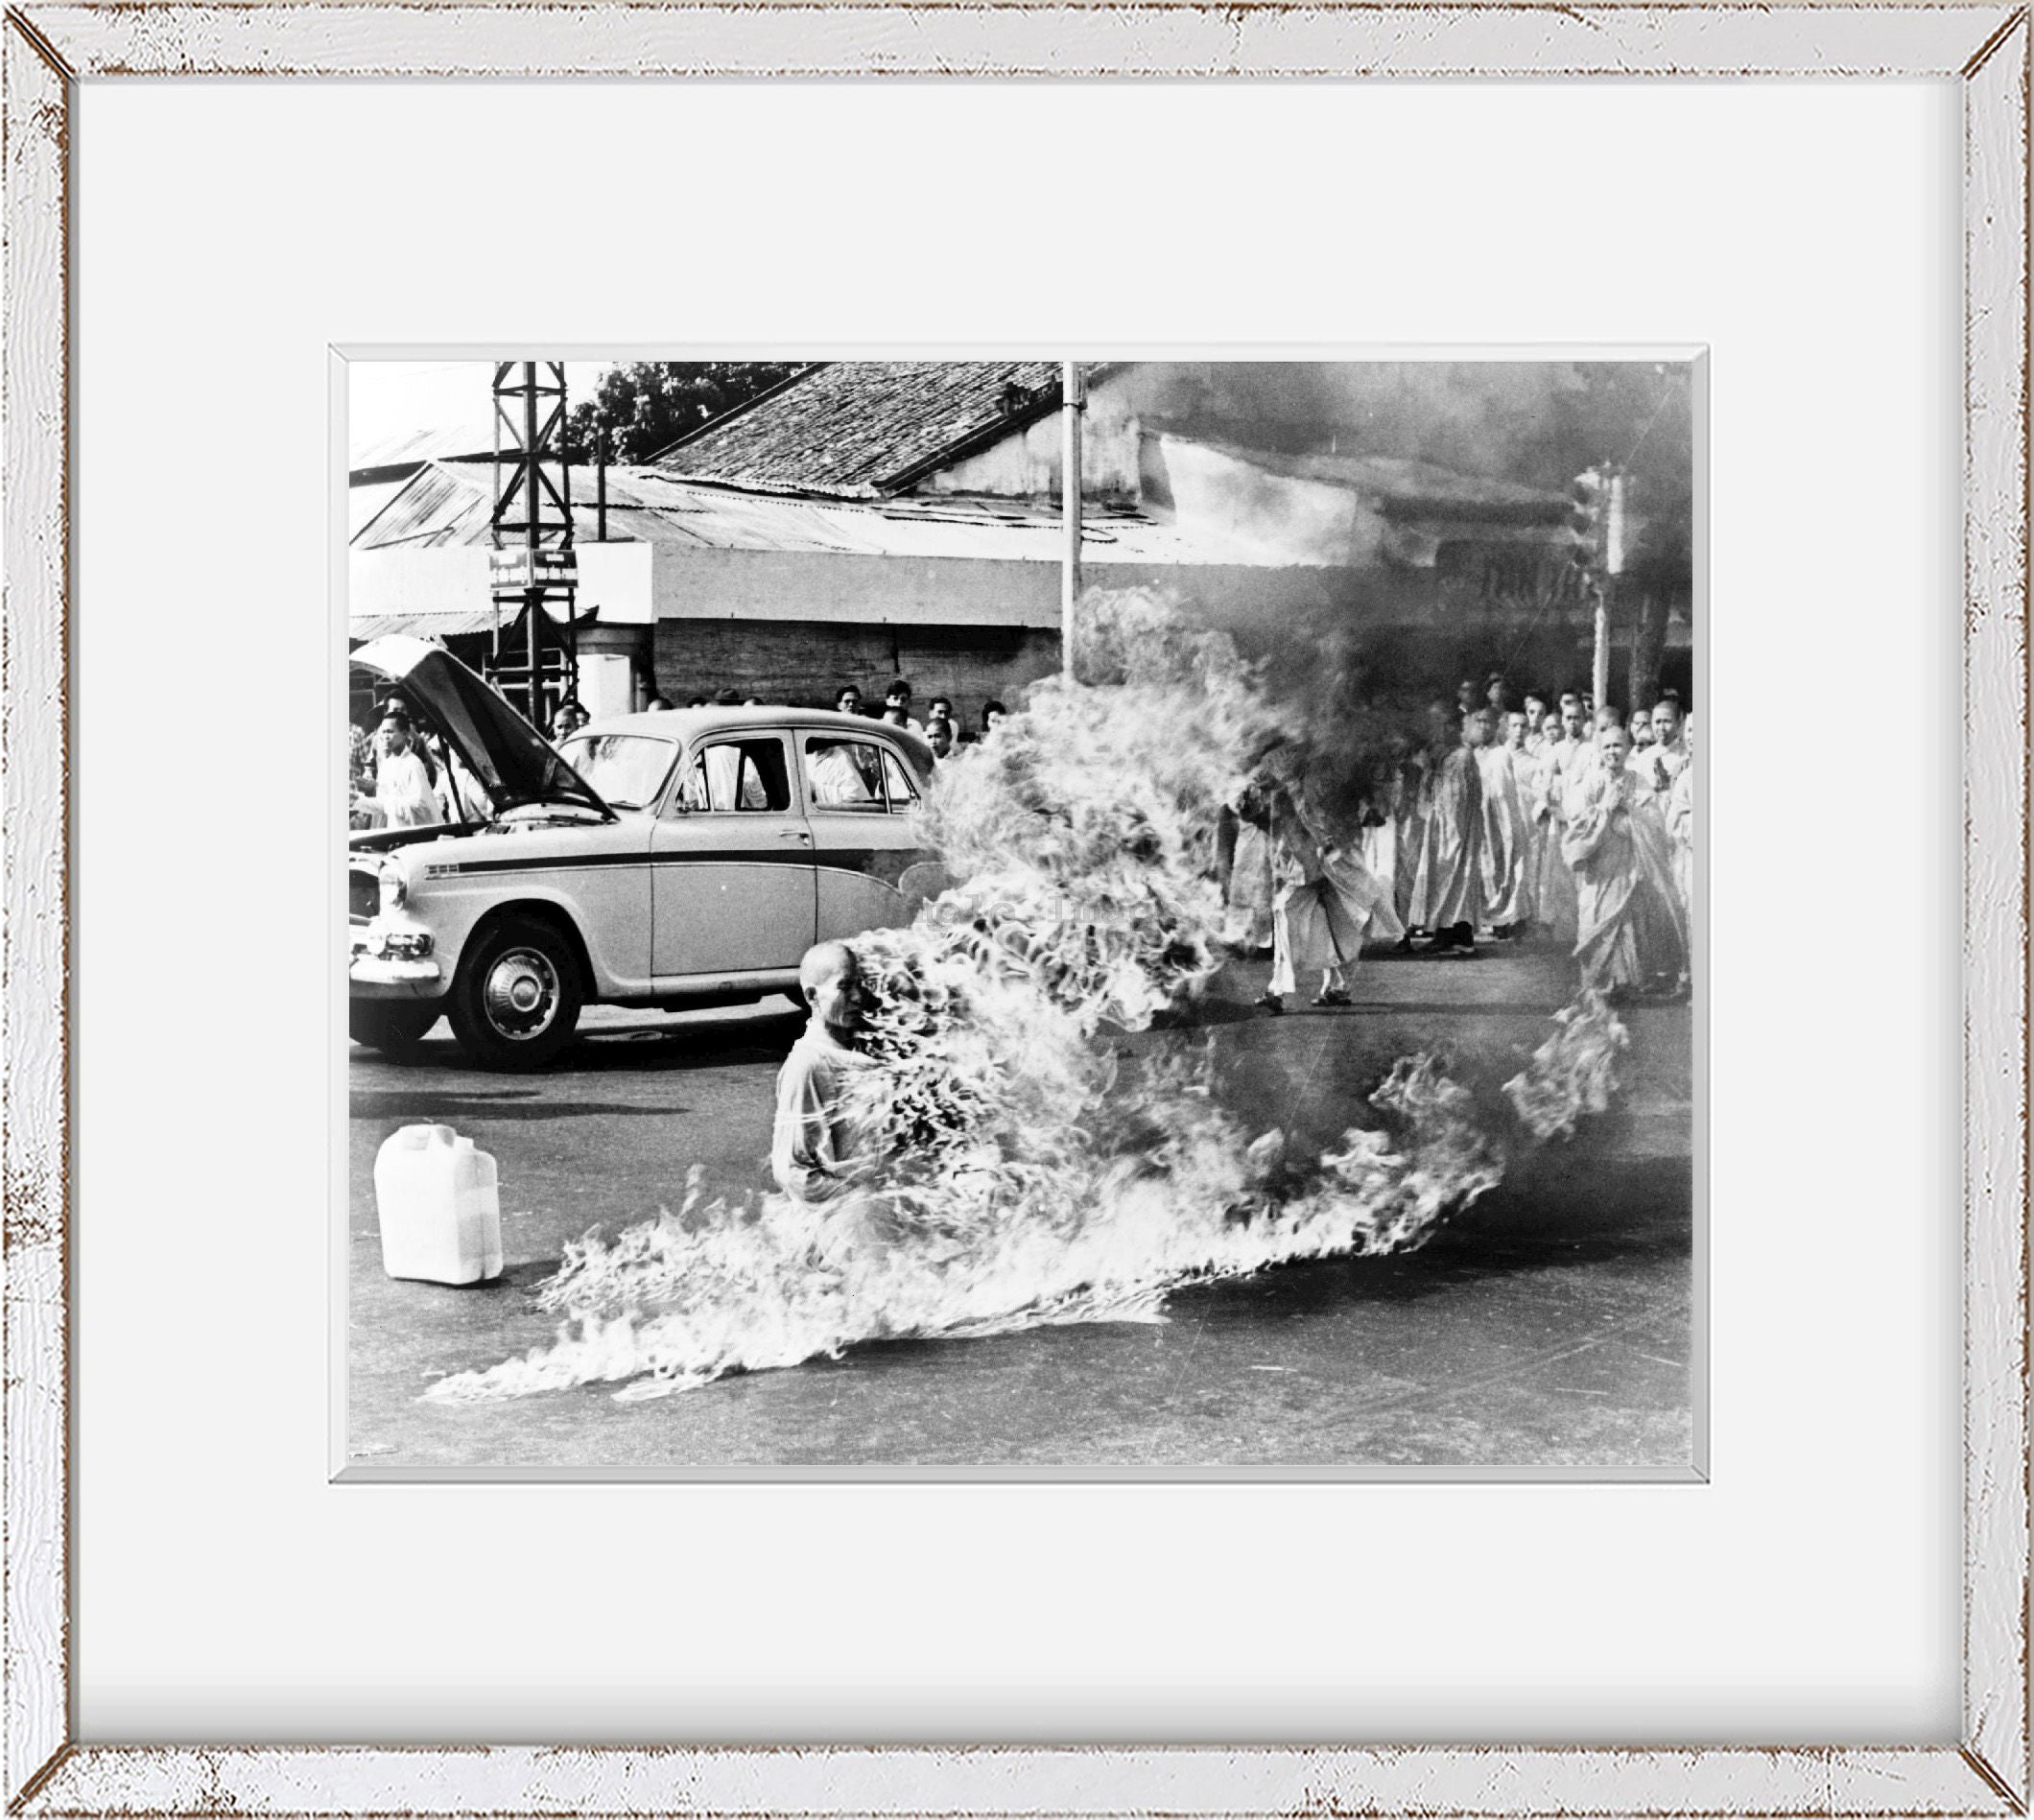 Photo: Buddhist Monk, Thich Quang Duc, Burning to Death, Protest Size: 8x10 (App